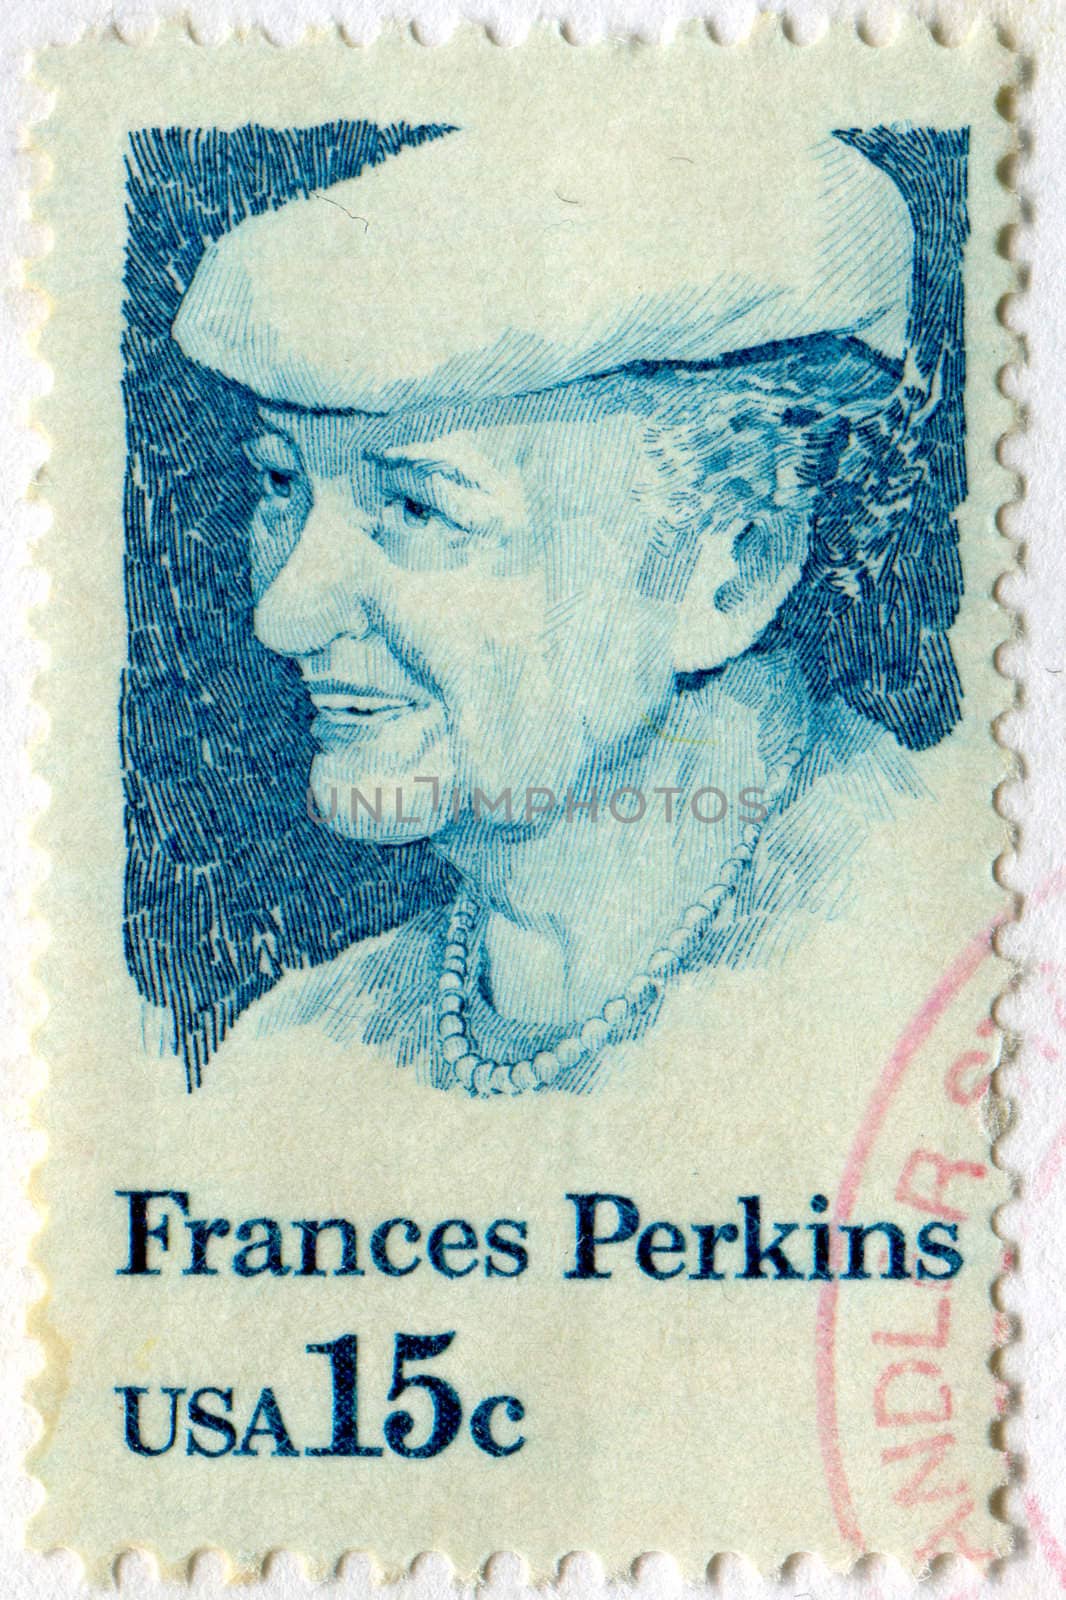 UNITED STATES - CIRCA 1981: stamp printed by United states, shows Frances Perkins, circa 1981